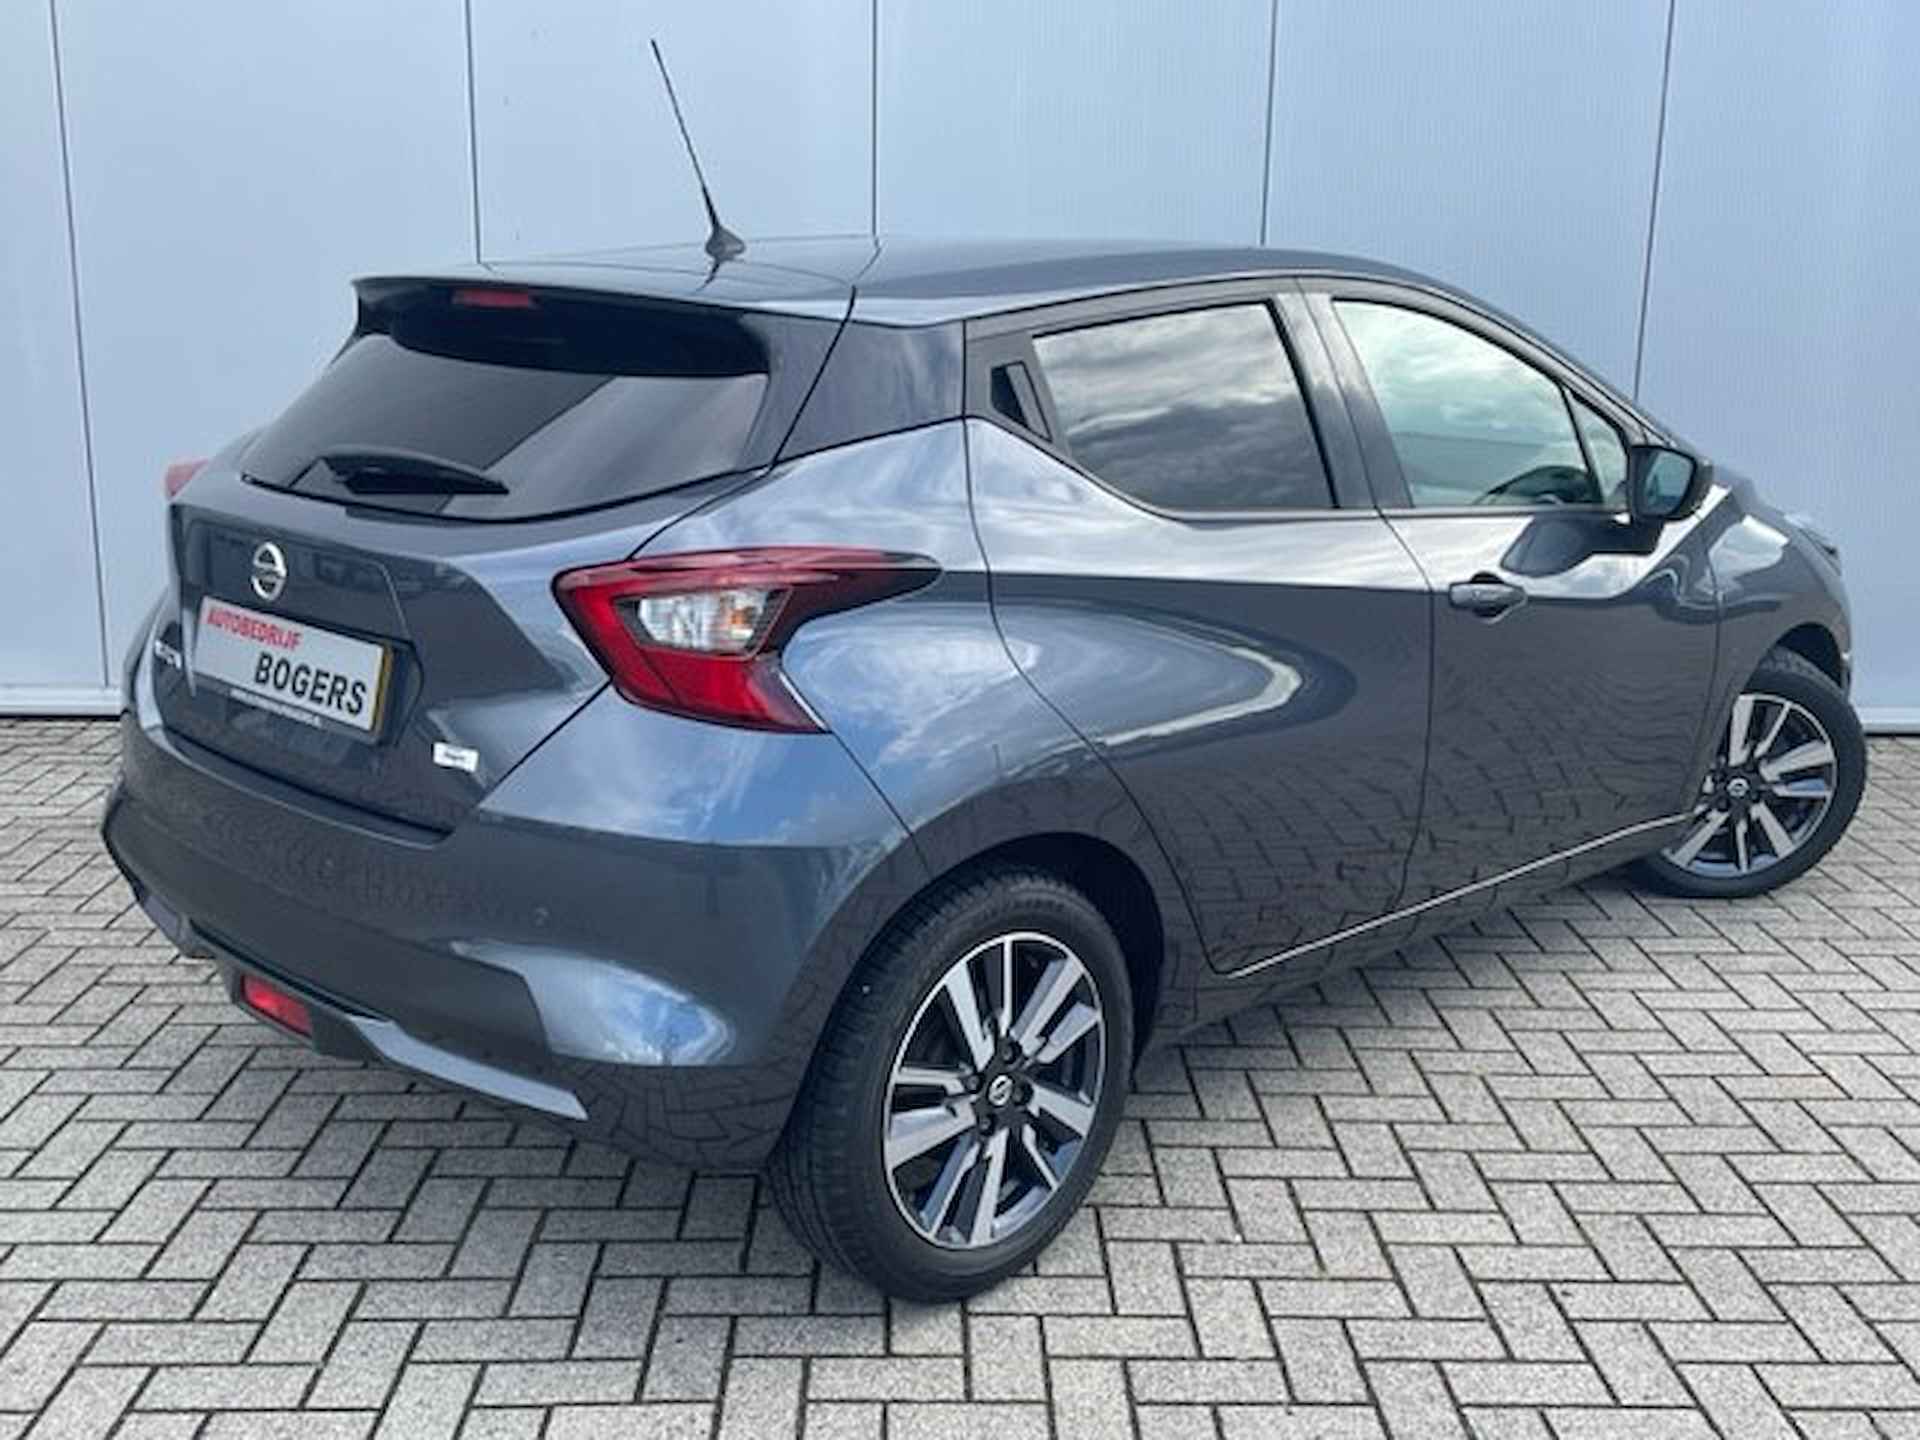 Nissan Micra 1.0 IG-T N-Connecta Navigatie, Climate Control, Cruise Control, 16"Lm, Achteruitrijcamera - 2/19